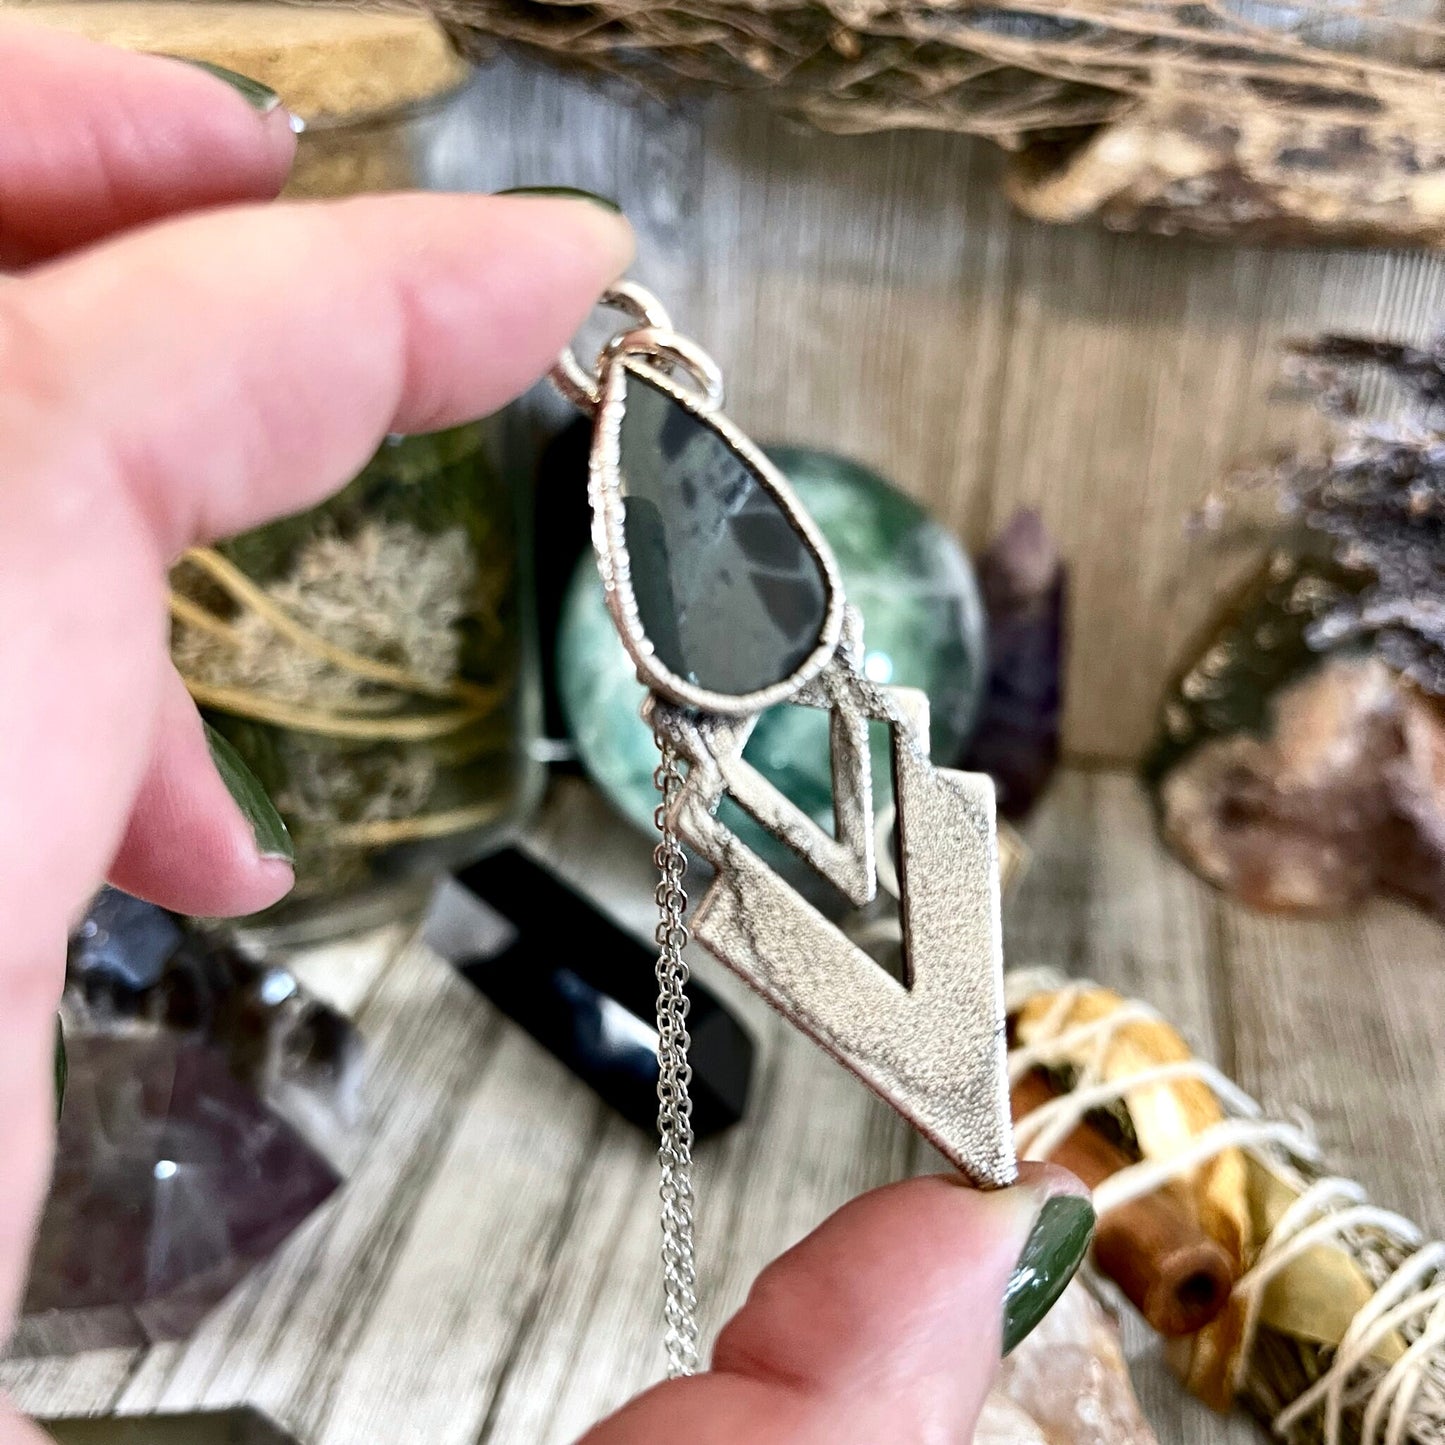 Big Crystal Necklace, Big Stone Necklace, Bohemian Jewelry, Crystal Necklaces, Etsy ID: 1634824085, Foxlark Alchemy, FOXLARK- NECKLACES, Gothic Jewelry, Jewelry, Large Crystal, Large Raw Crystal, layering necklace, Necklaces, Raw crystal jewelry, raw crys